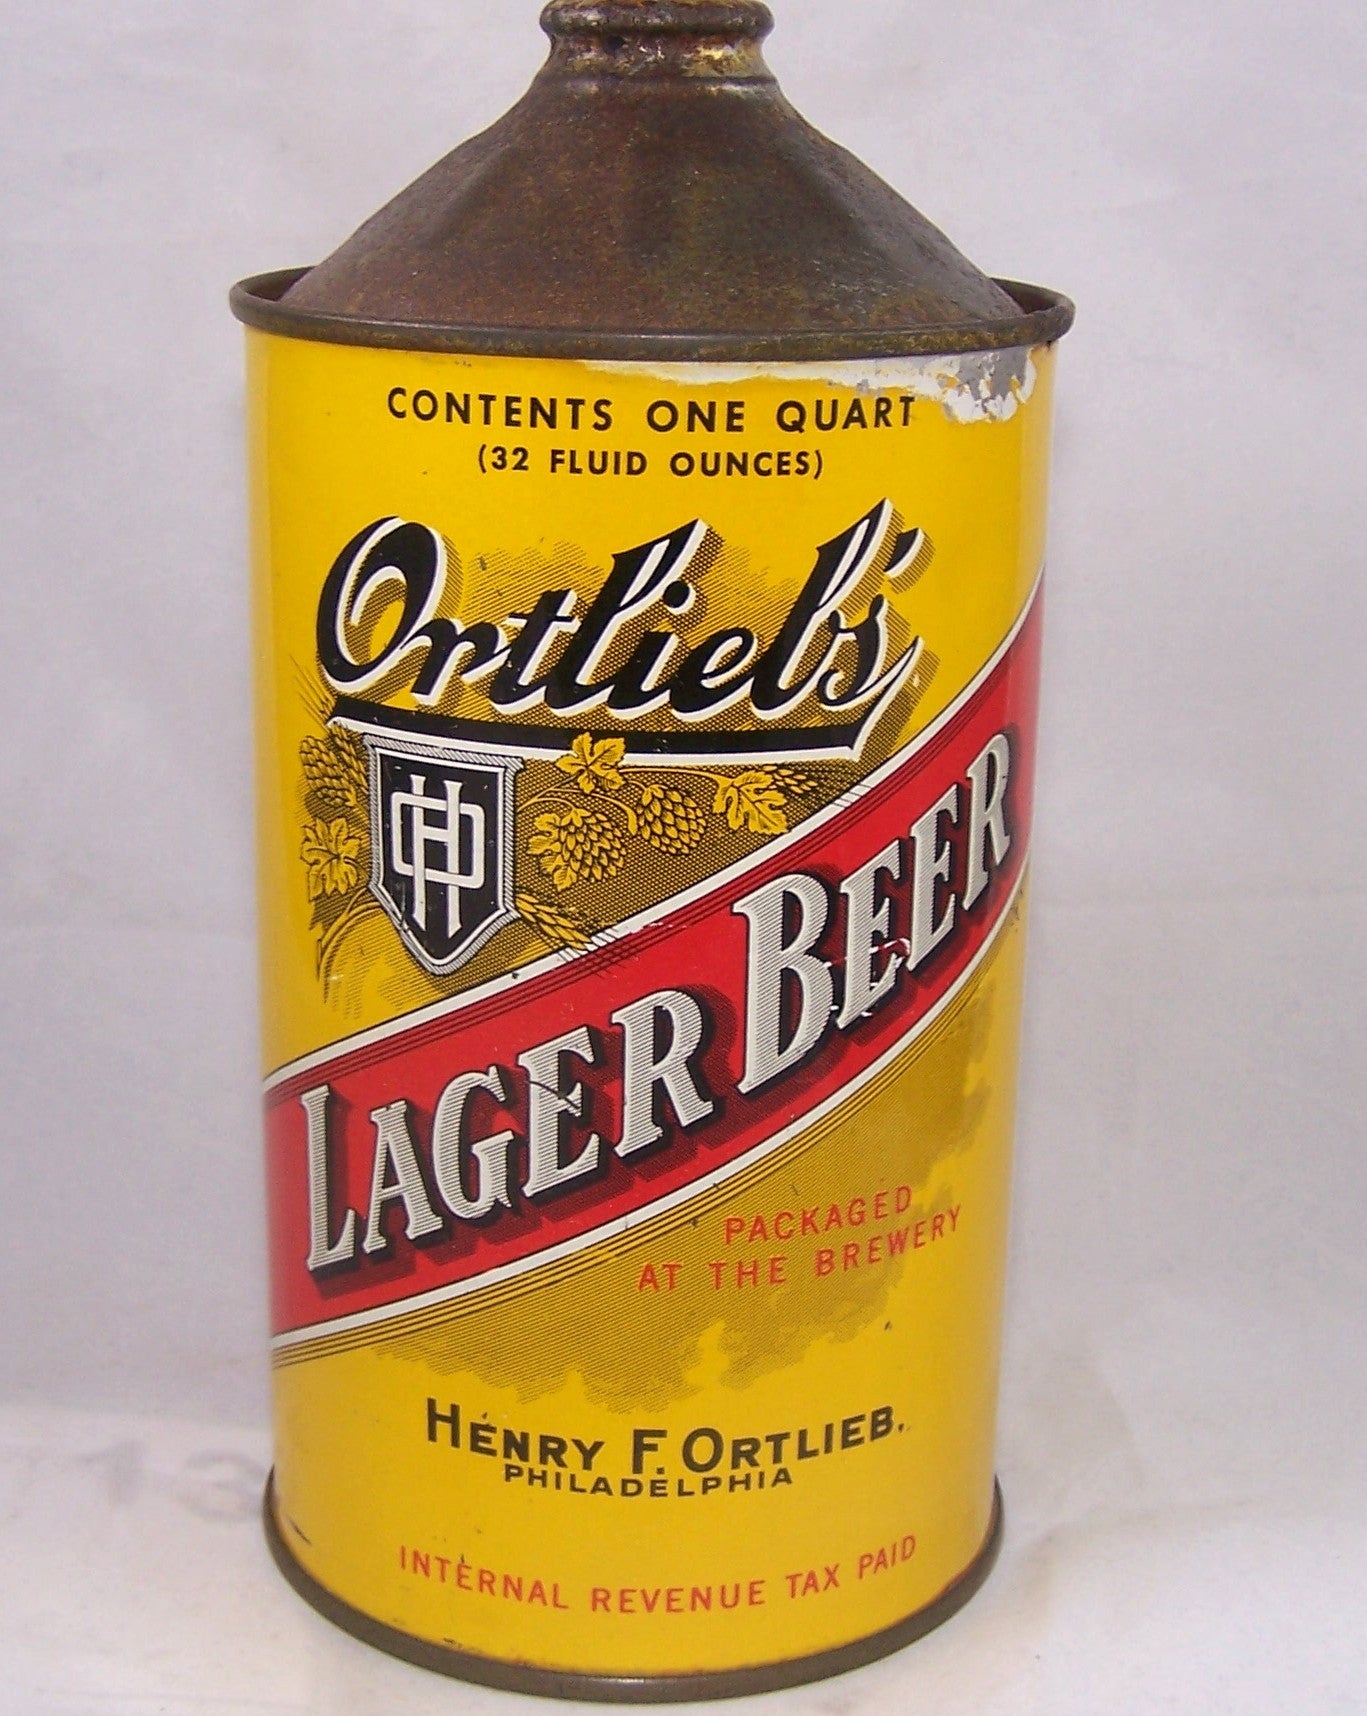 Ortlieb's Lager Beer, USBC 216-13, Grade 1/1- Sold on 09/21/16